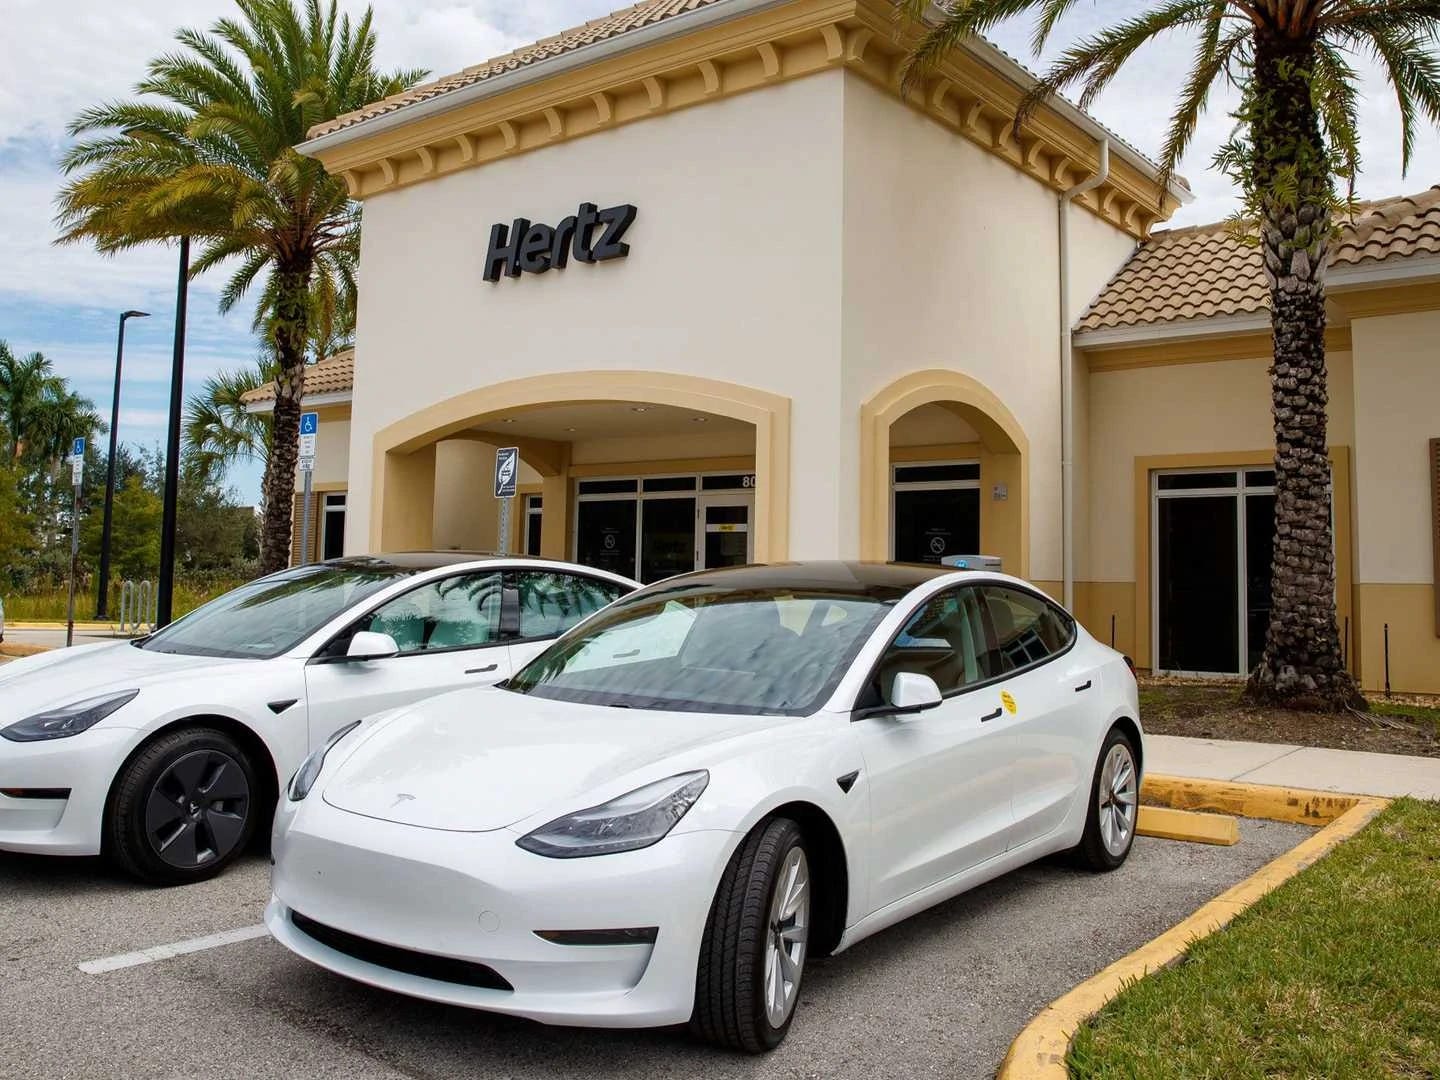 Hertz Says Tesla Began Deliveries As Musk Claims No Deal Is Signed